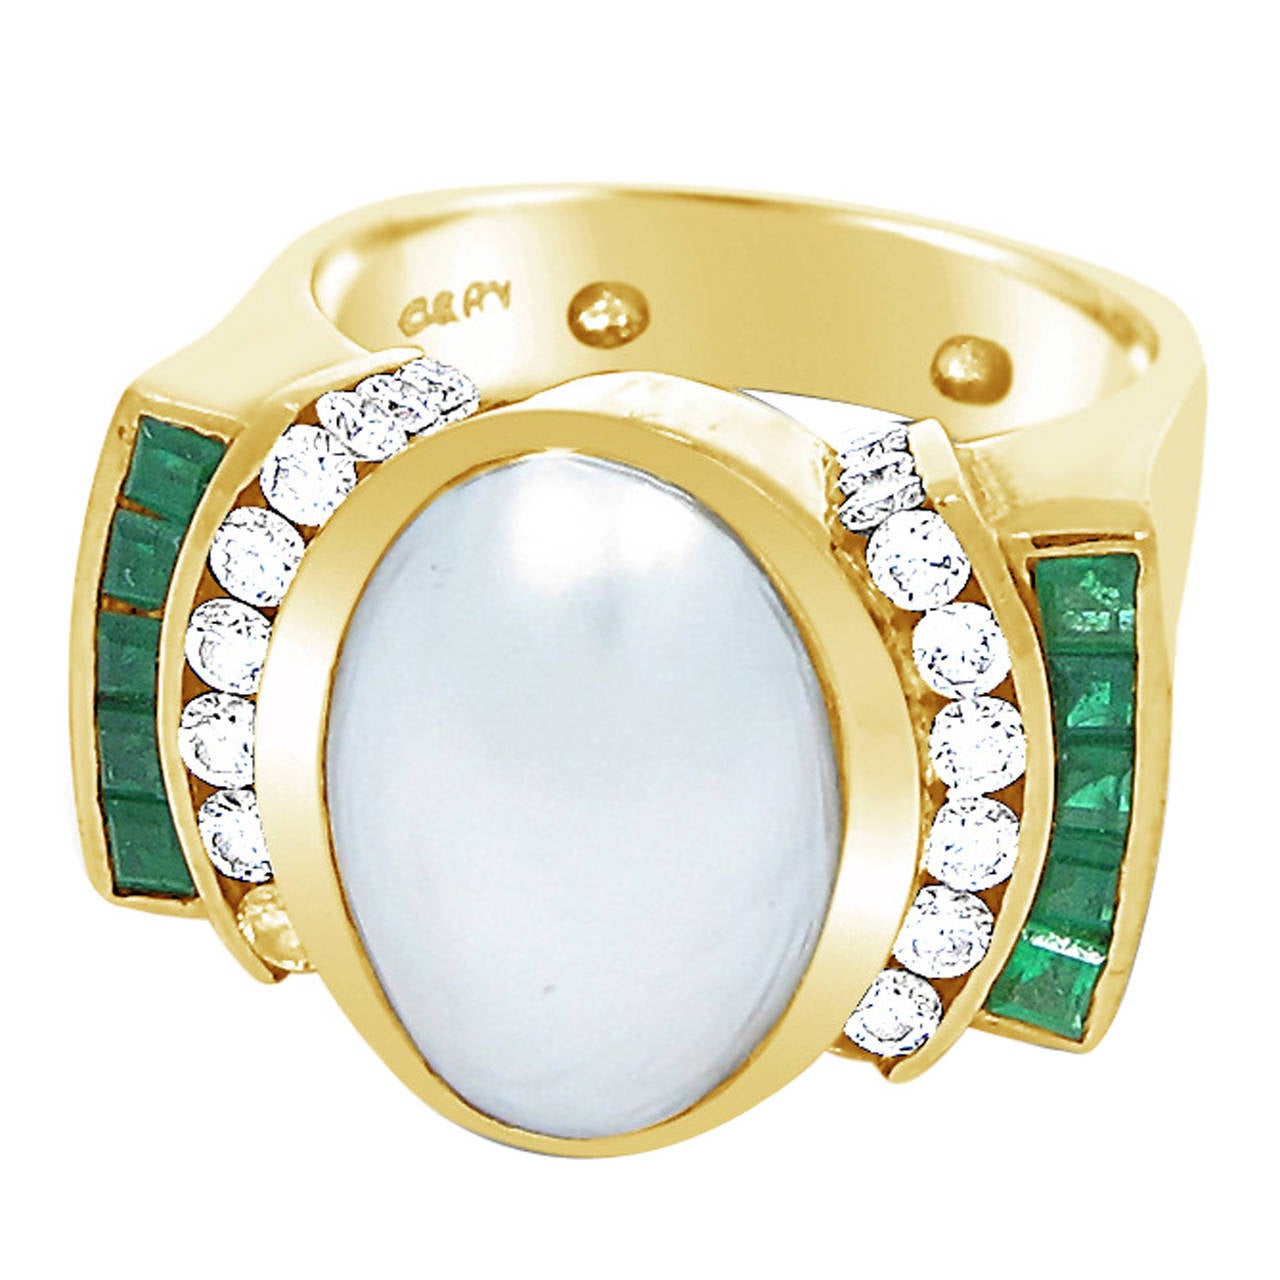 Charles Krypell Pearl Emerald Diamond Gold Cocktail Ring For Sale